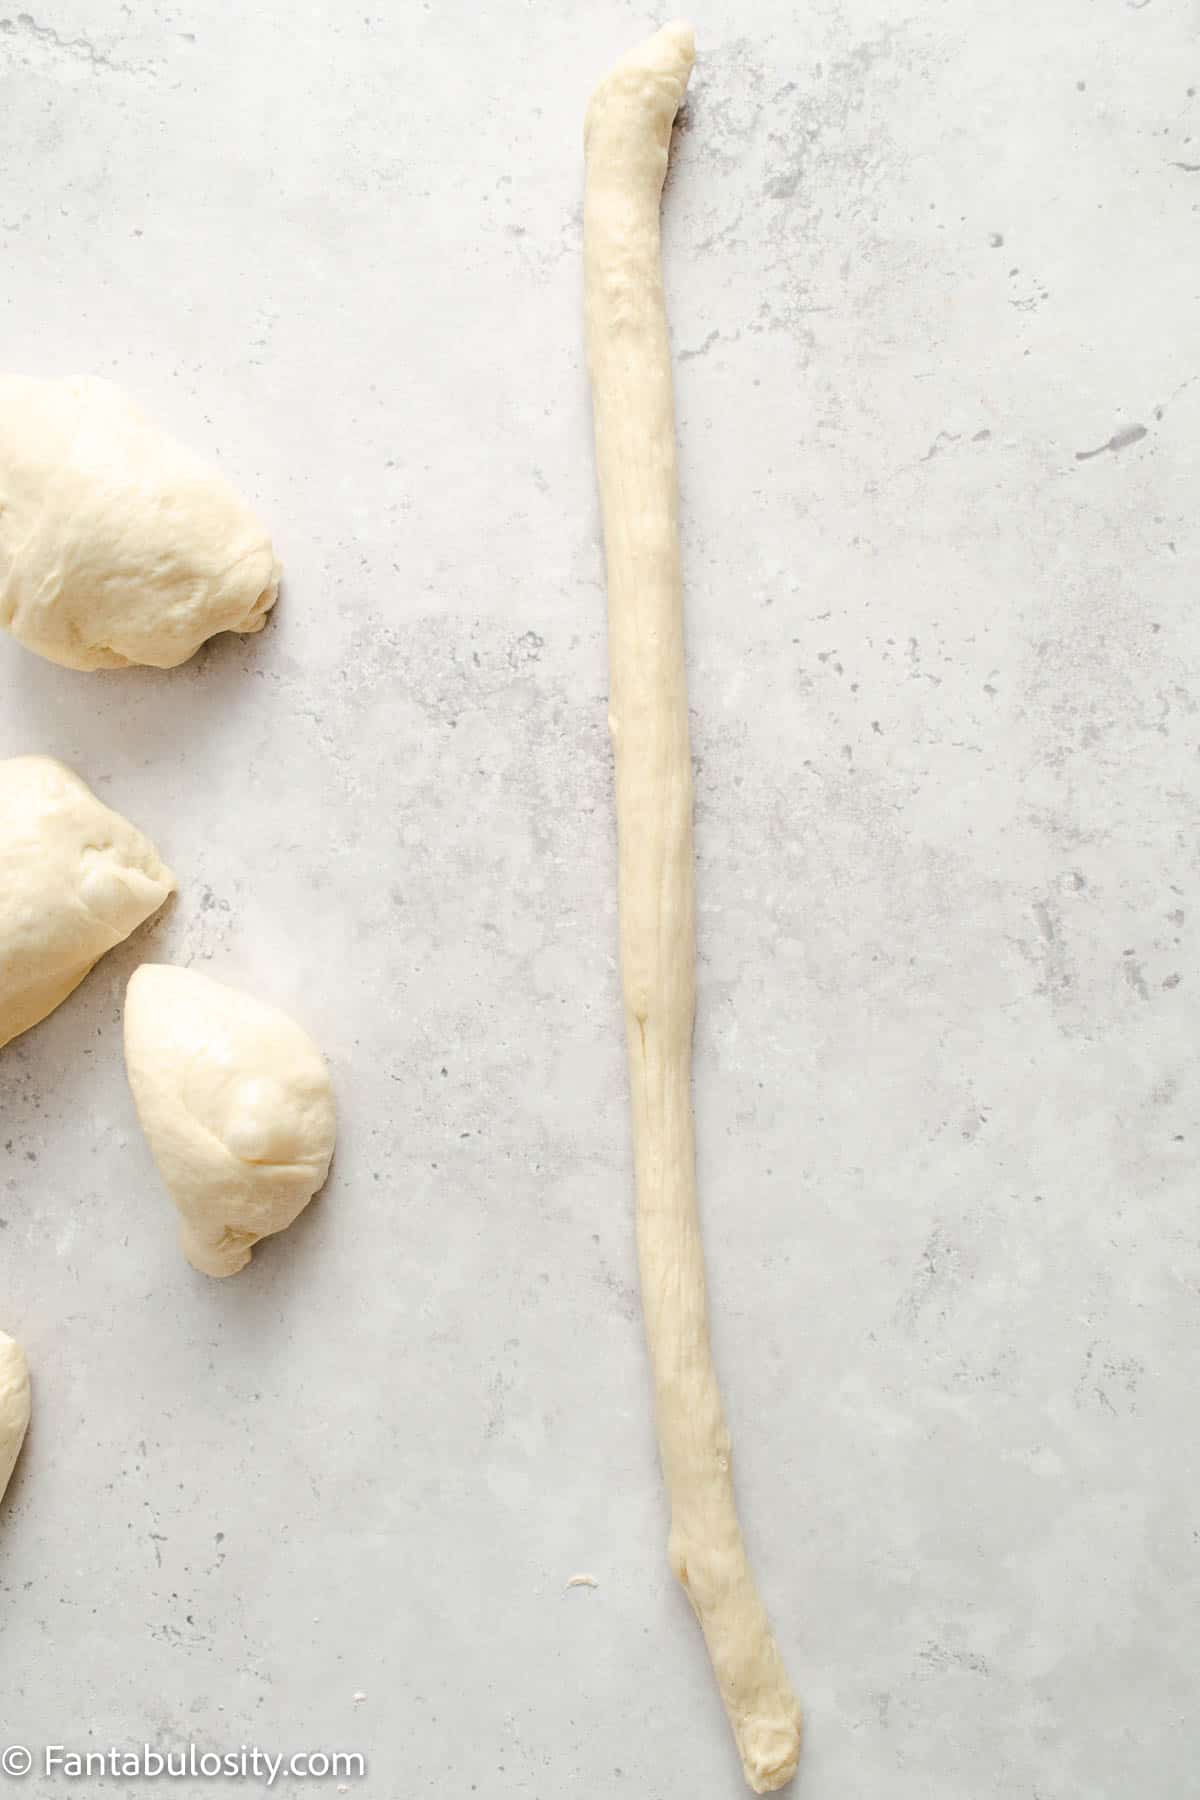 One ball of pretzel dough rolled out into a long rope-like line.